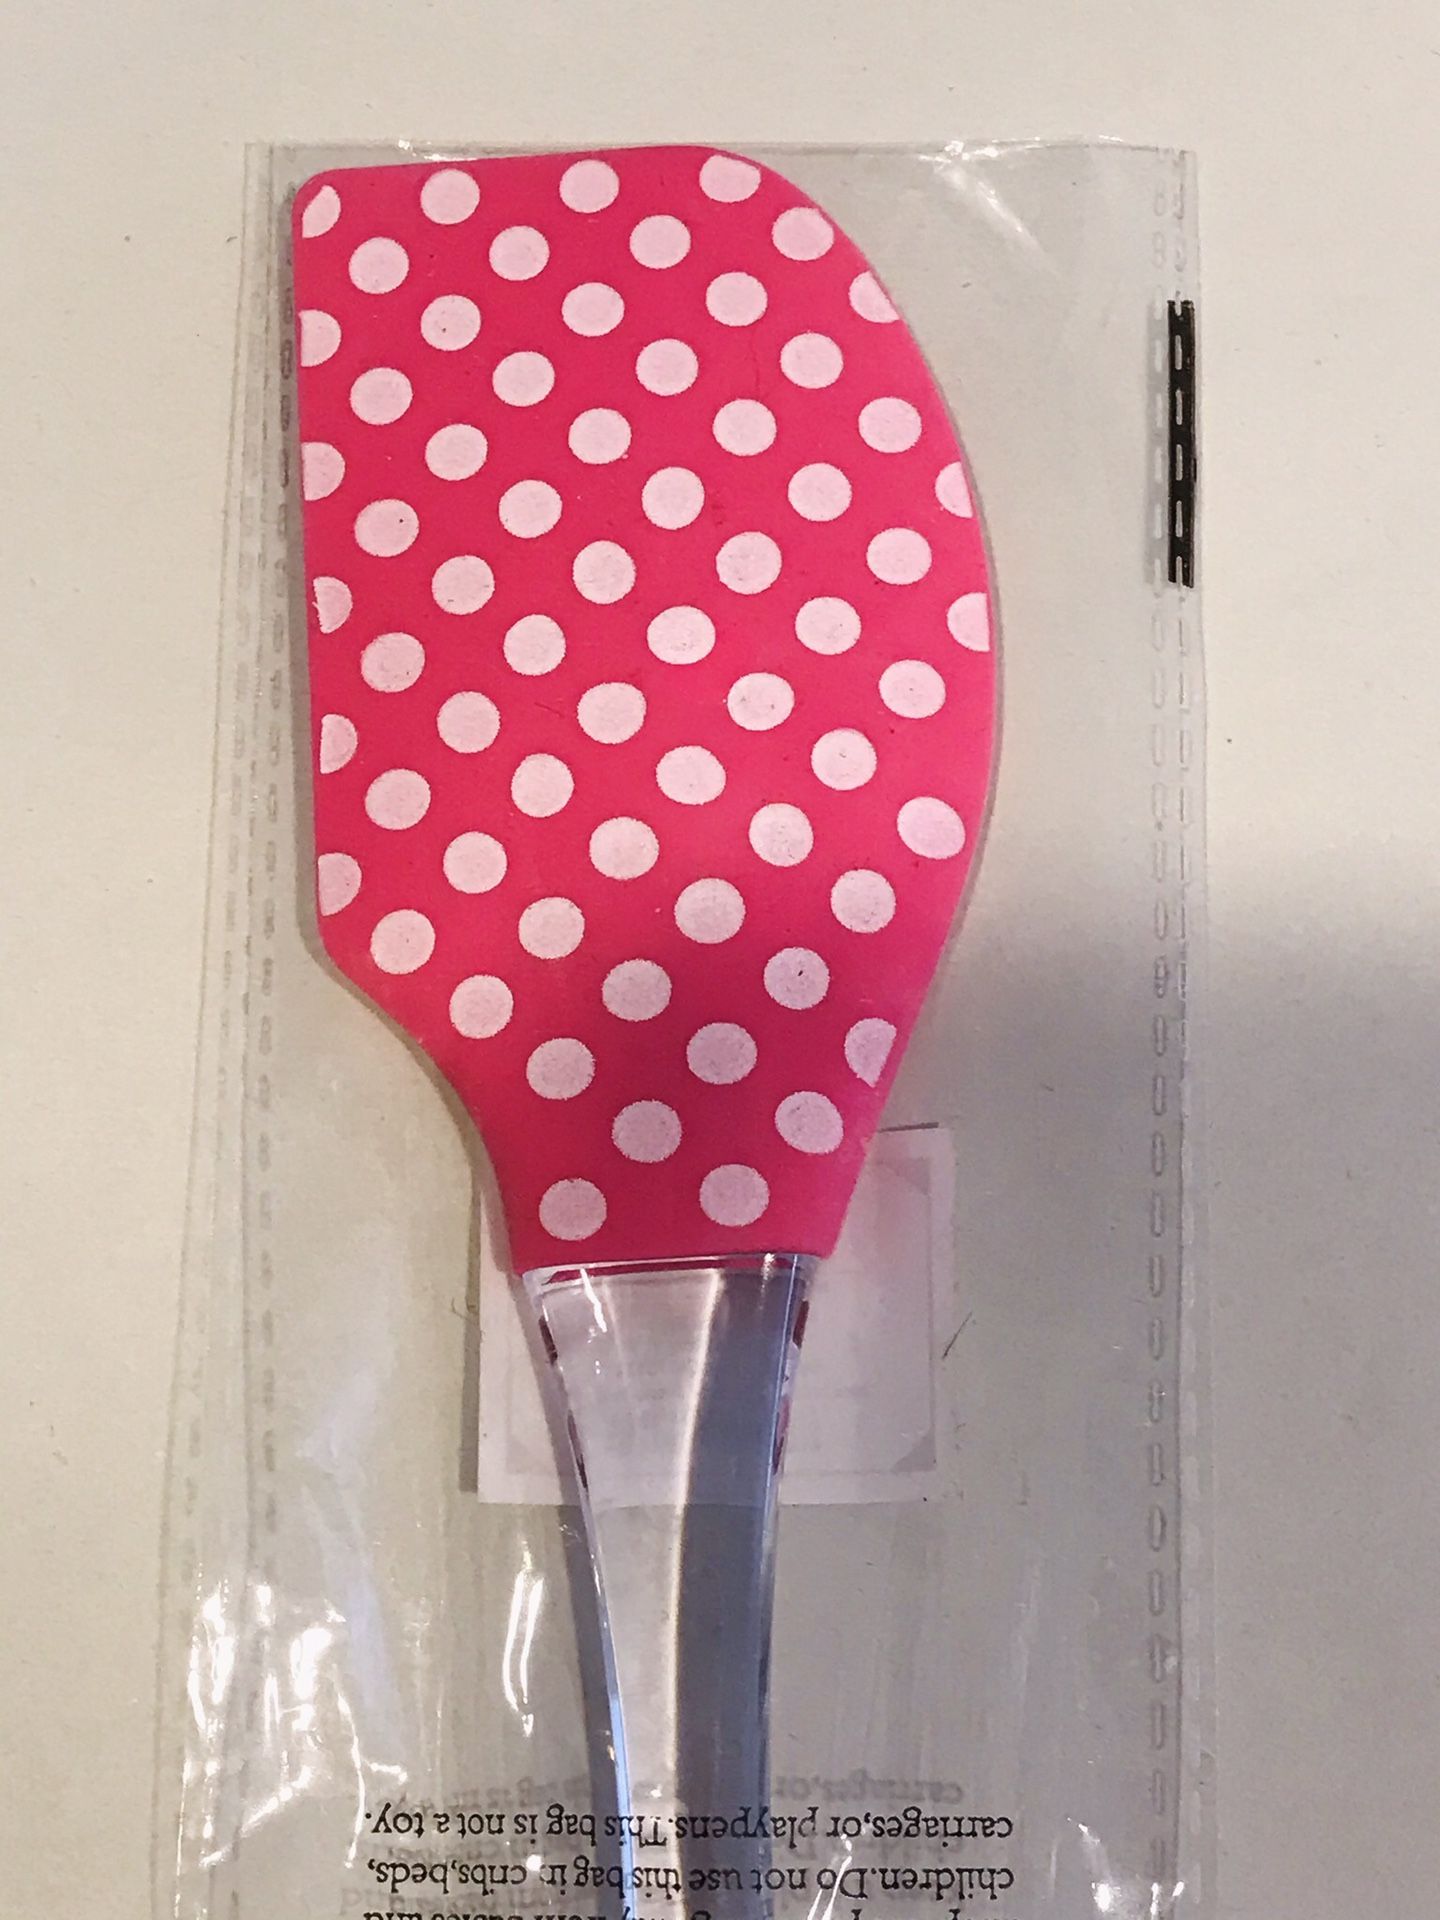 NEW in packaging, Large Rubber spatula, brighten your kitchen with this trendy spatula